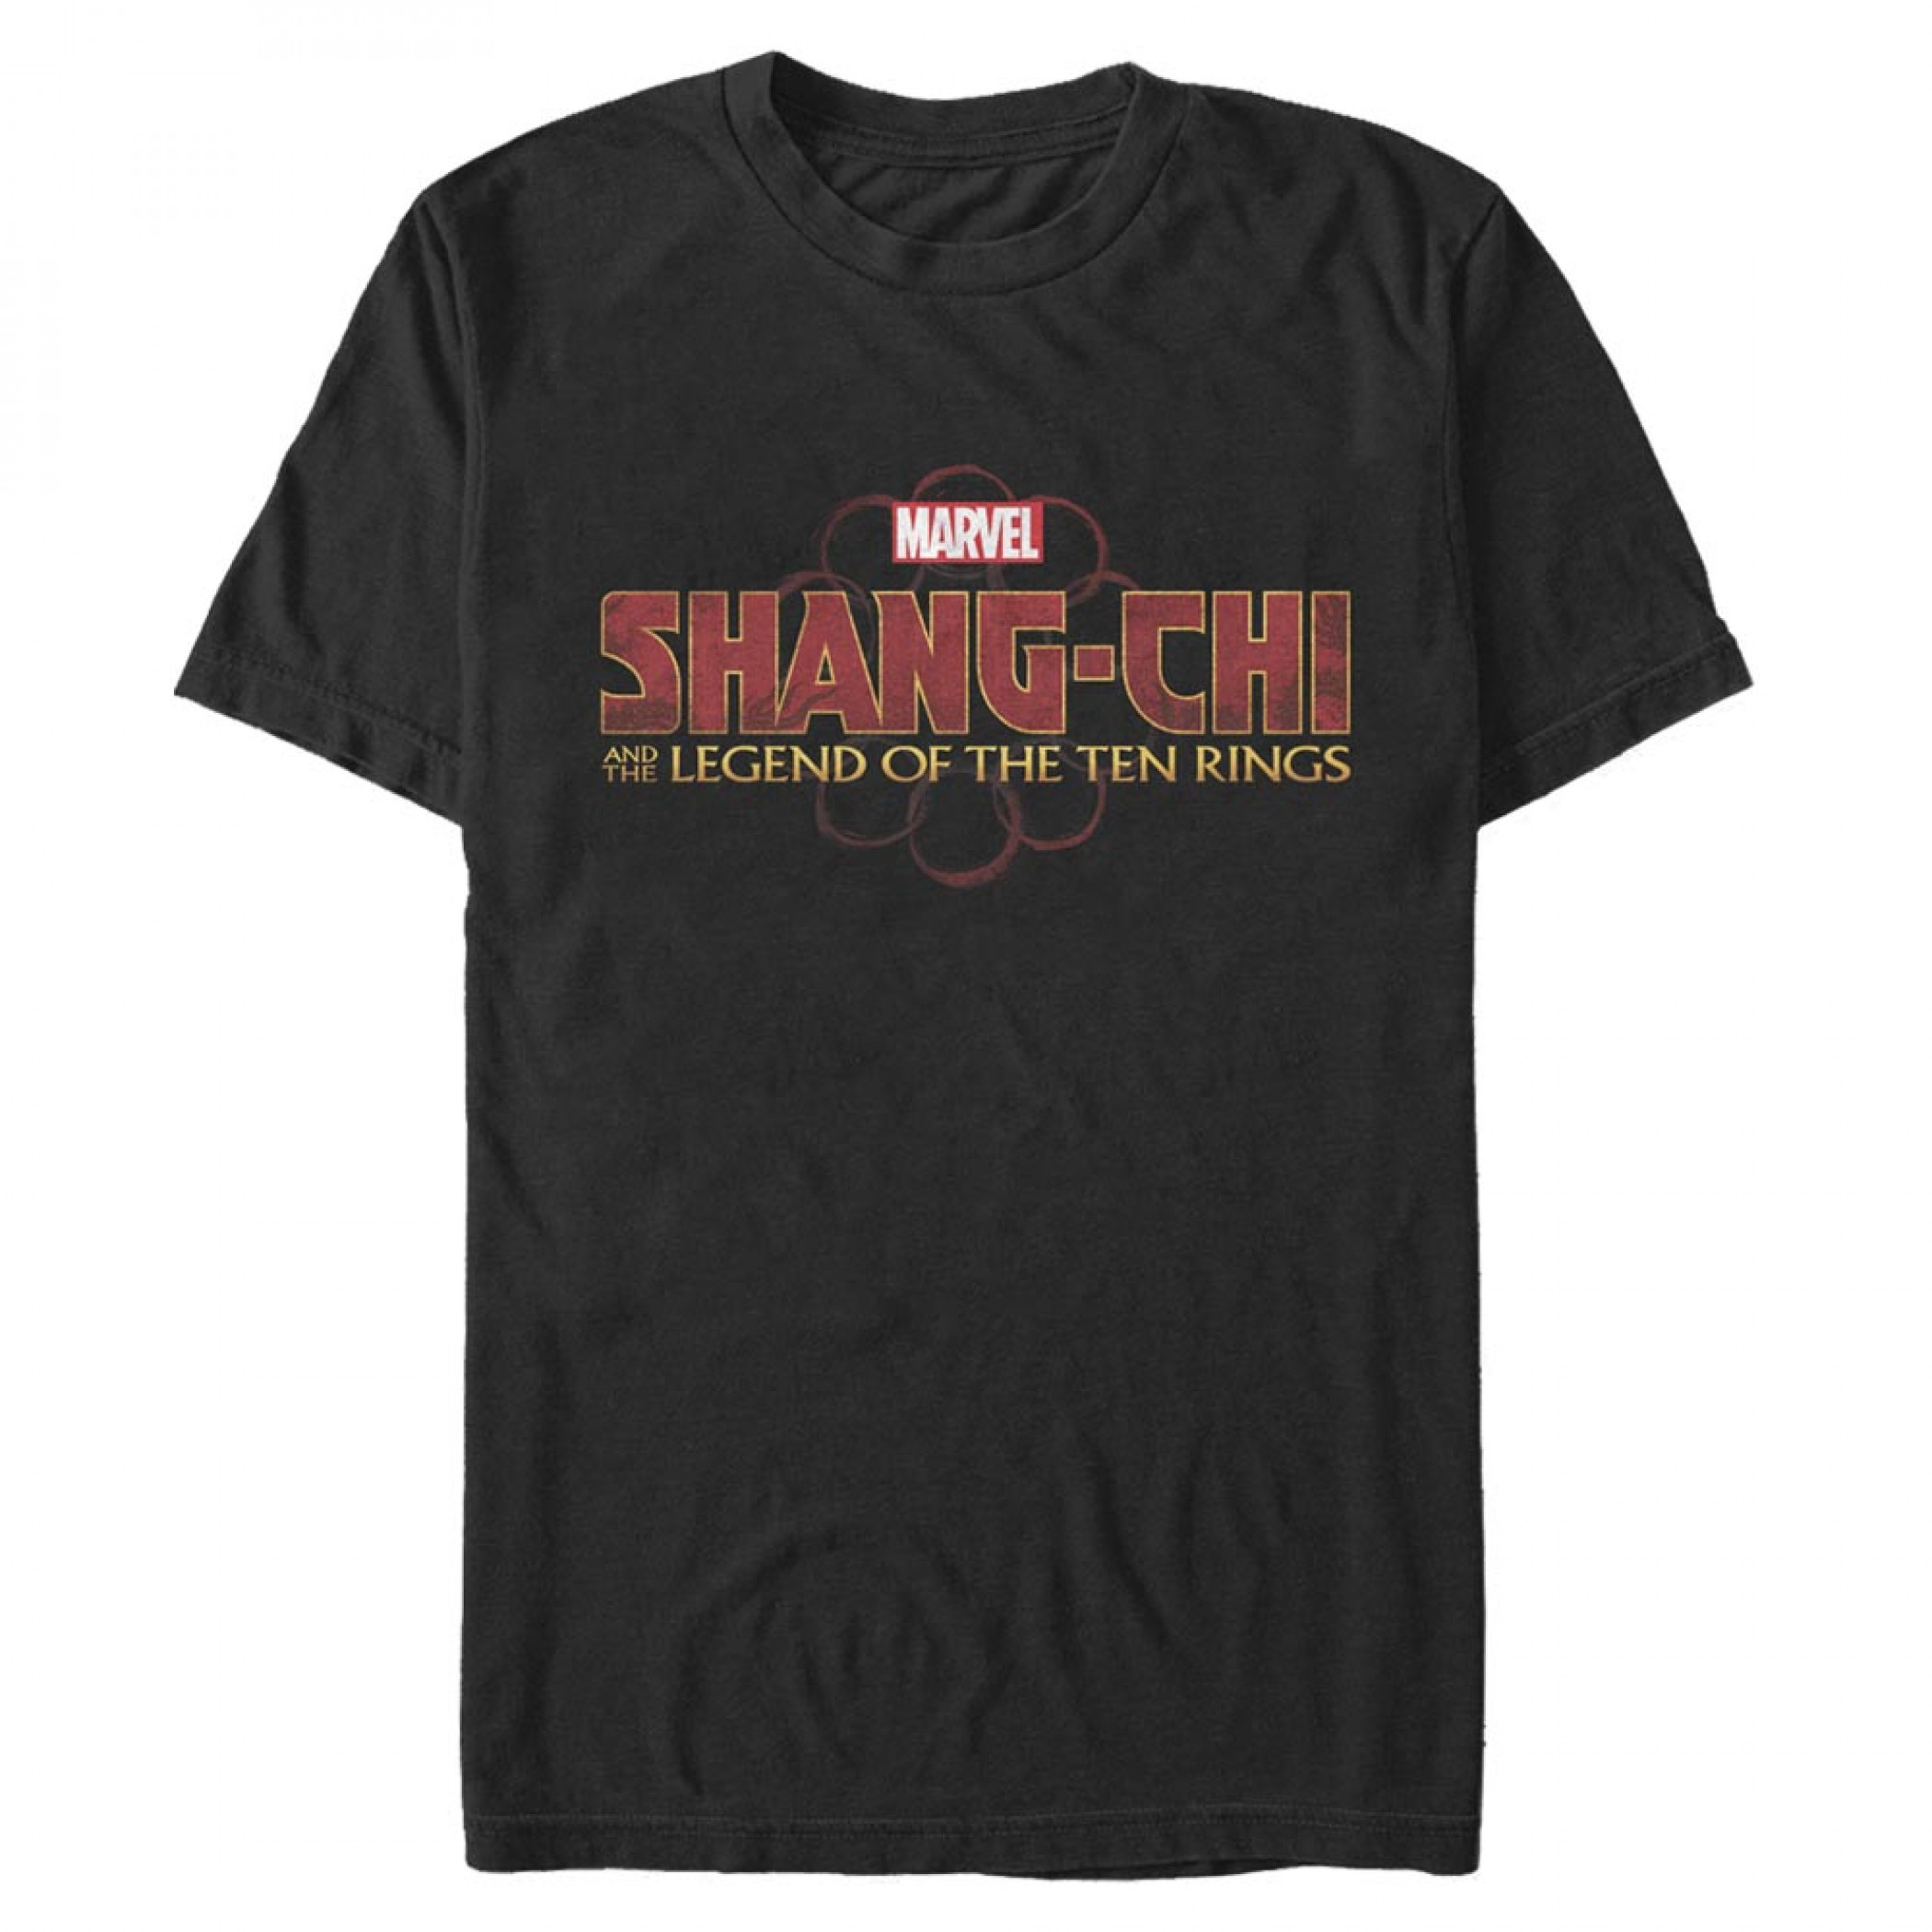 Shang-Chi and the Legend of the Ten Rings Logo T-Shirt